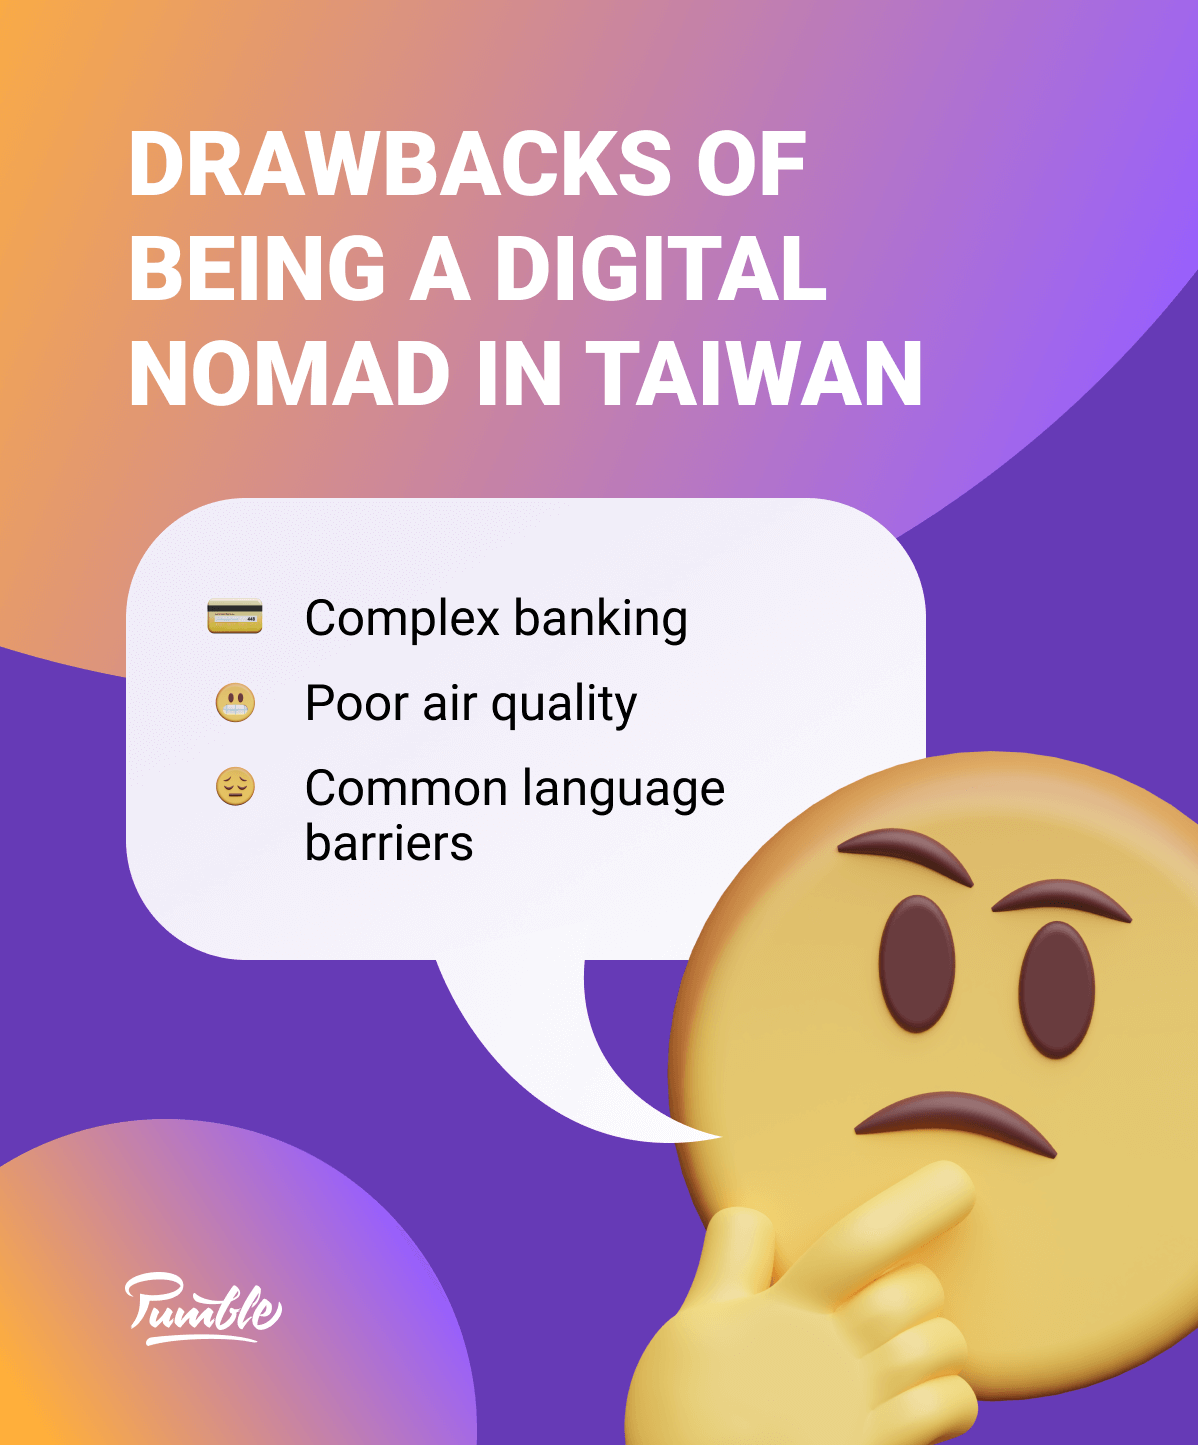 Drawbacks of being a digital nomad in Taiwan